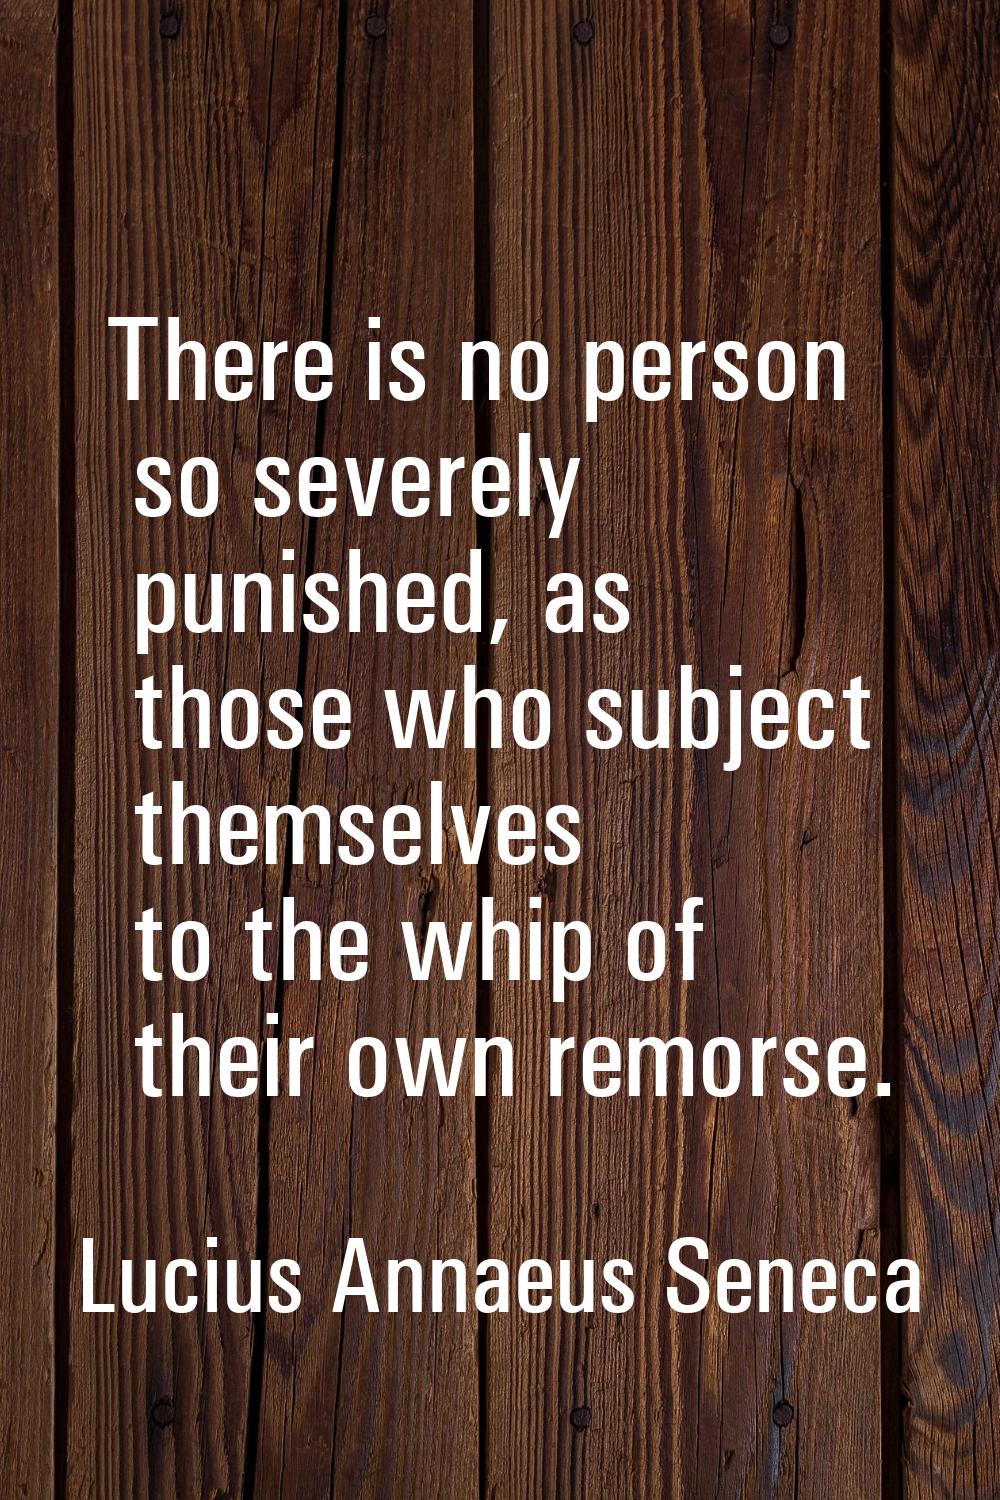 There is no person so severely punished, as those who subject themselves to the whip of their own r